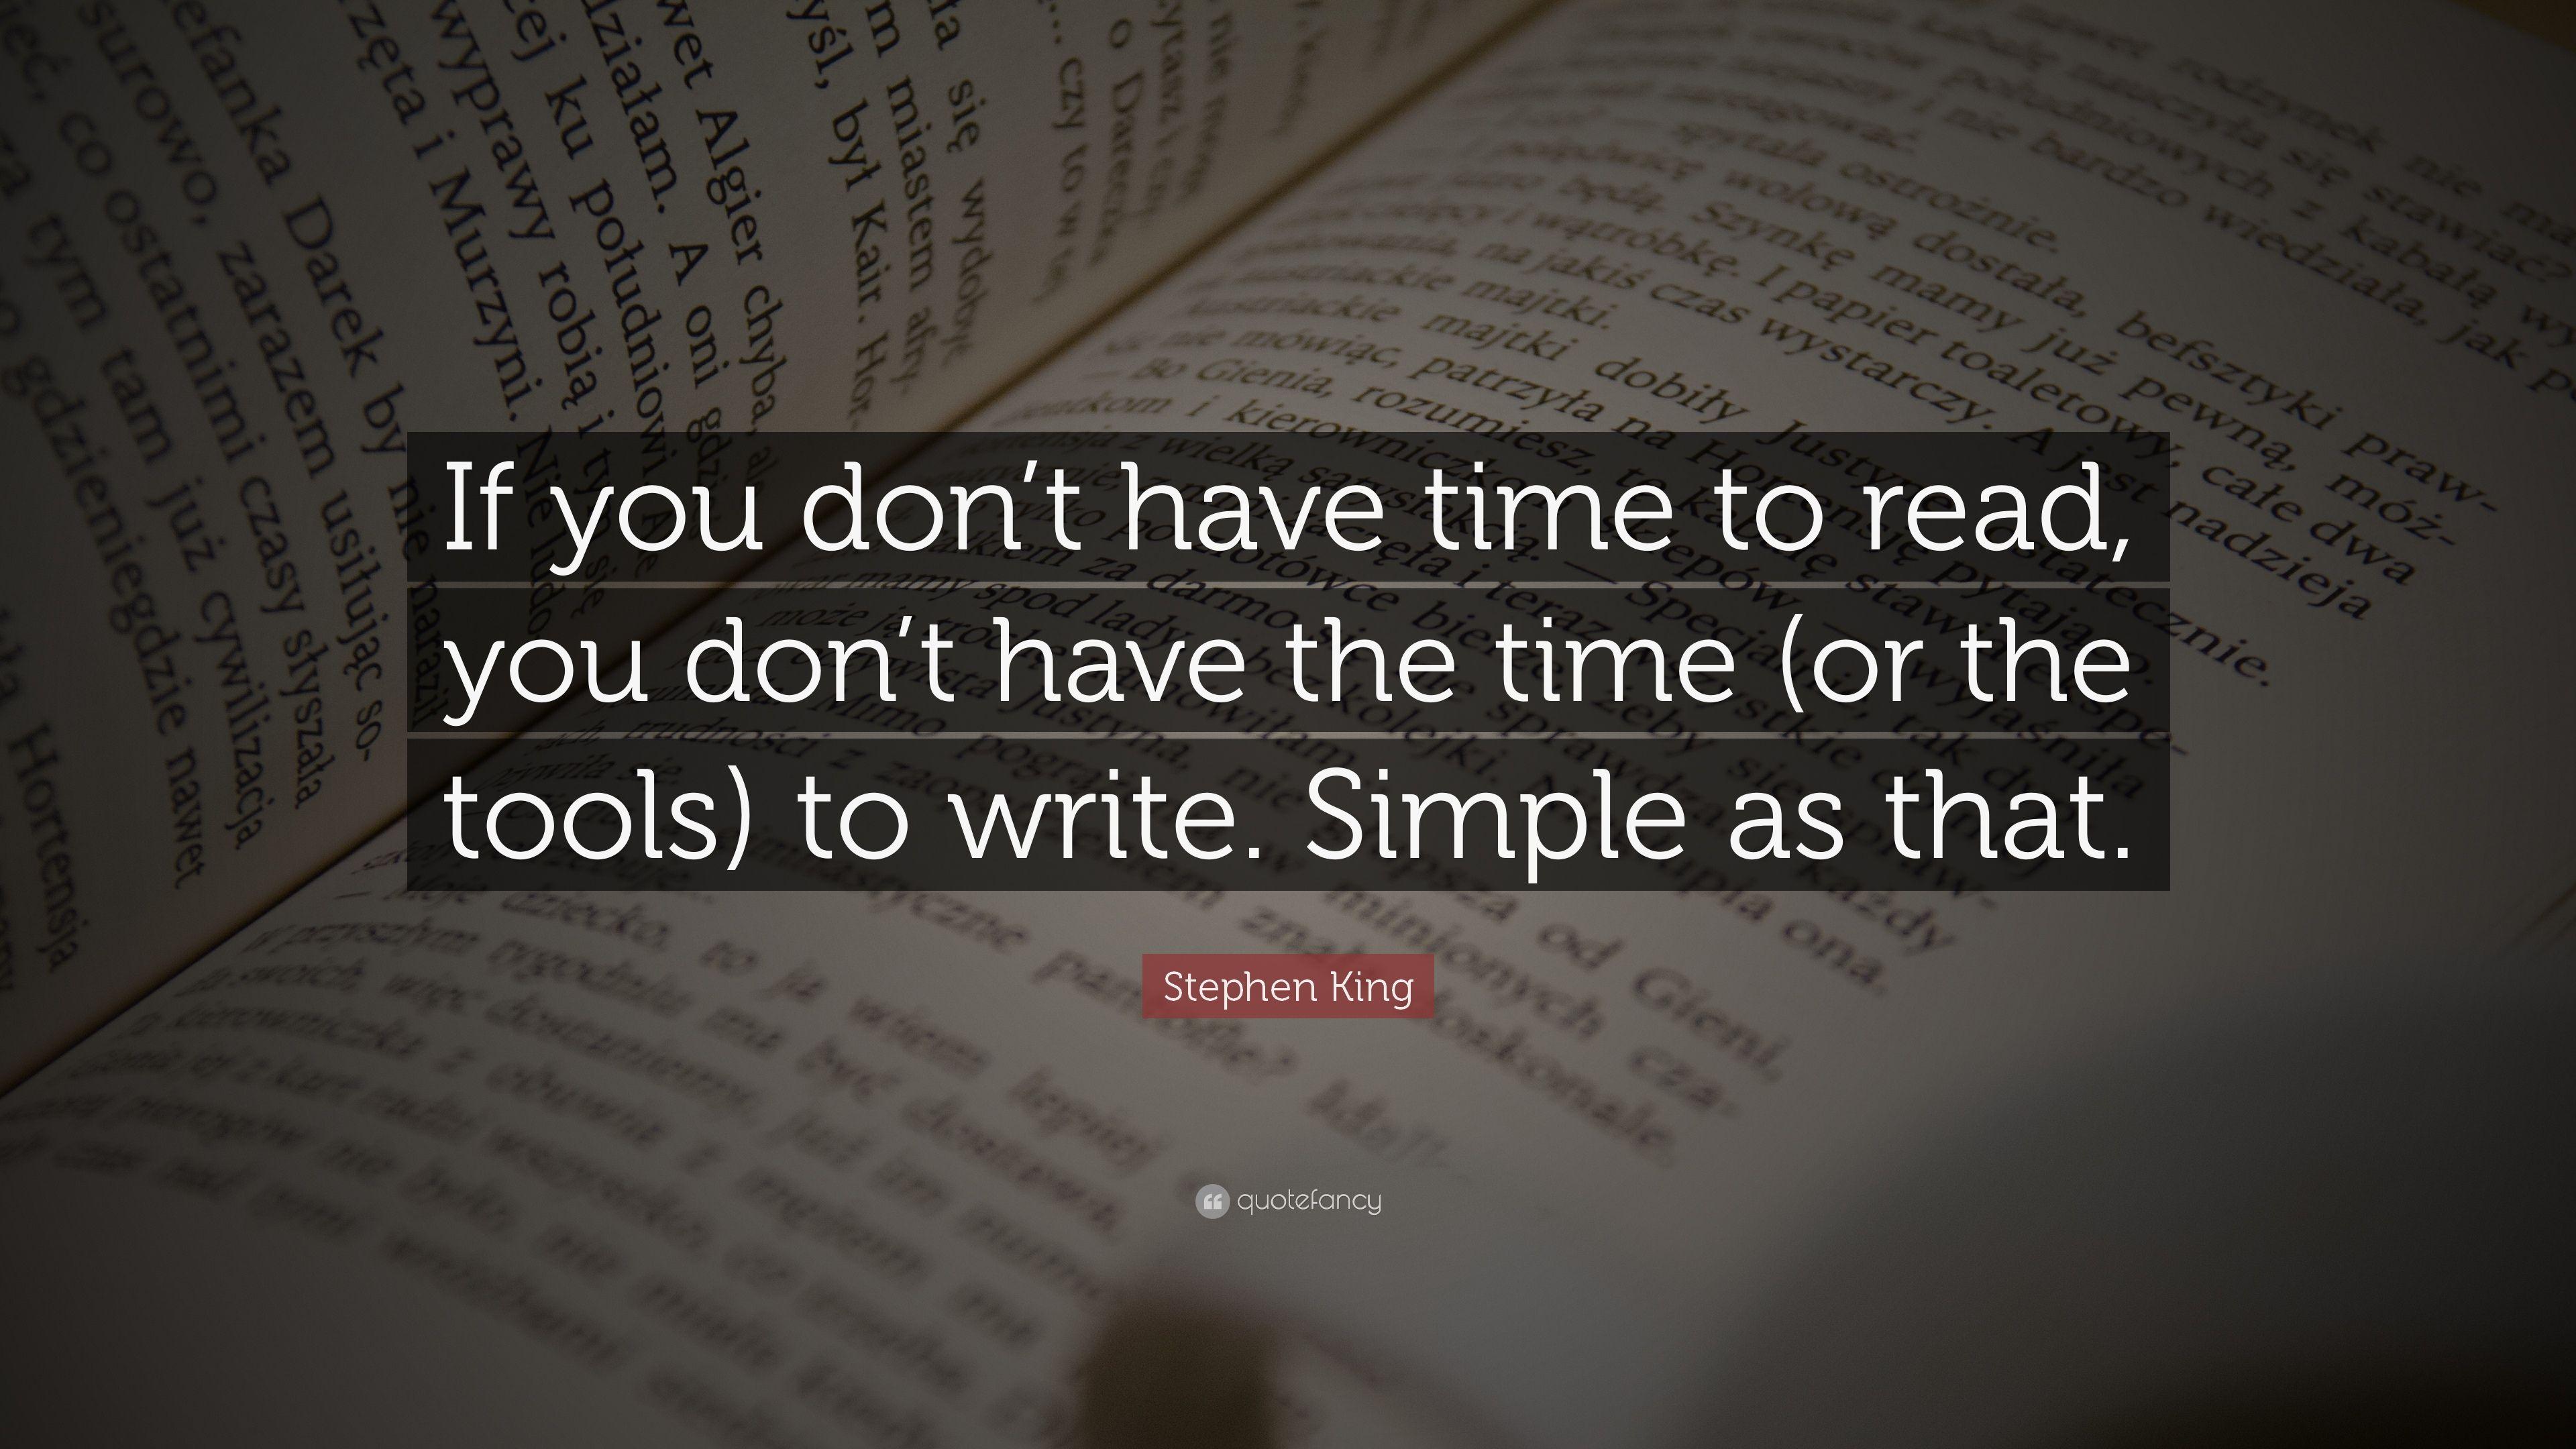 Stephen King Quote: “If you don't have time to read, you don't have